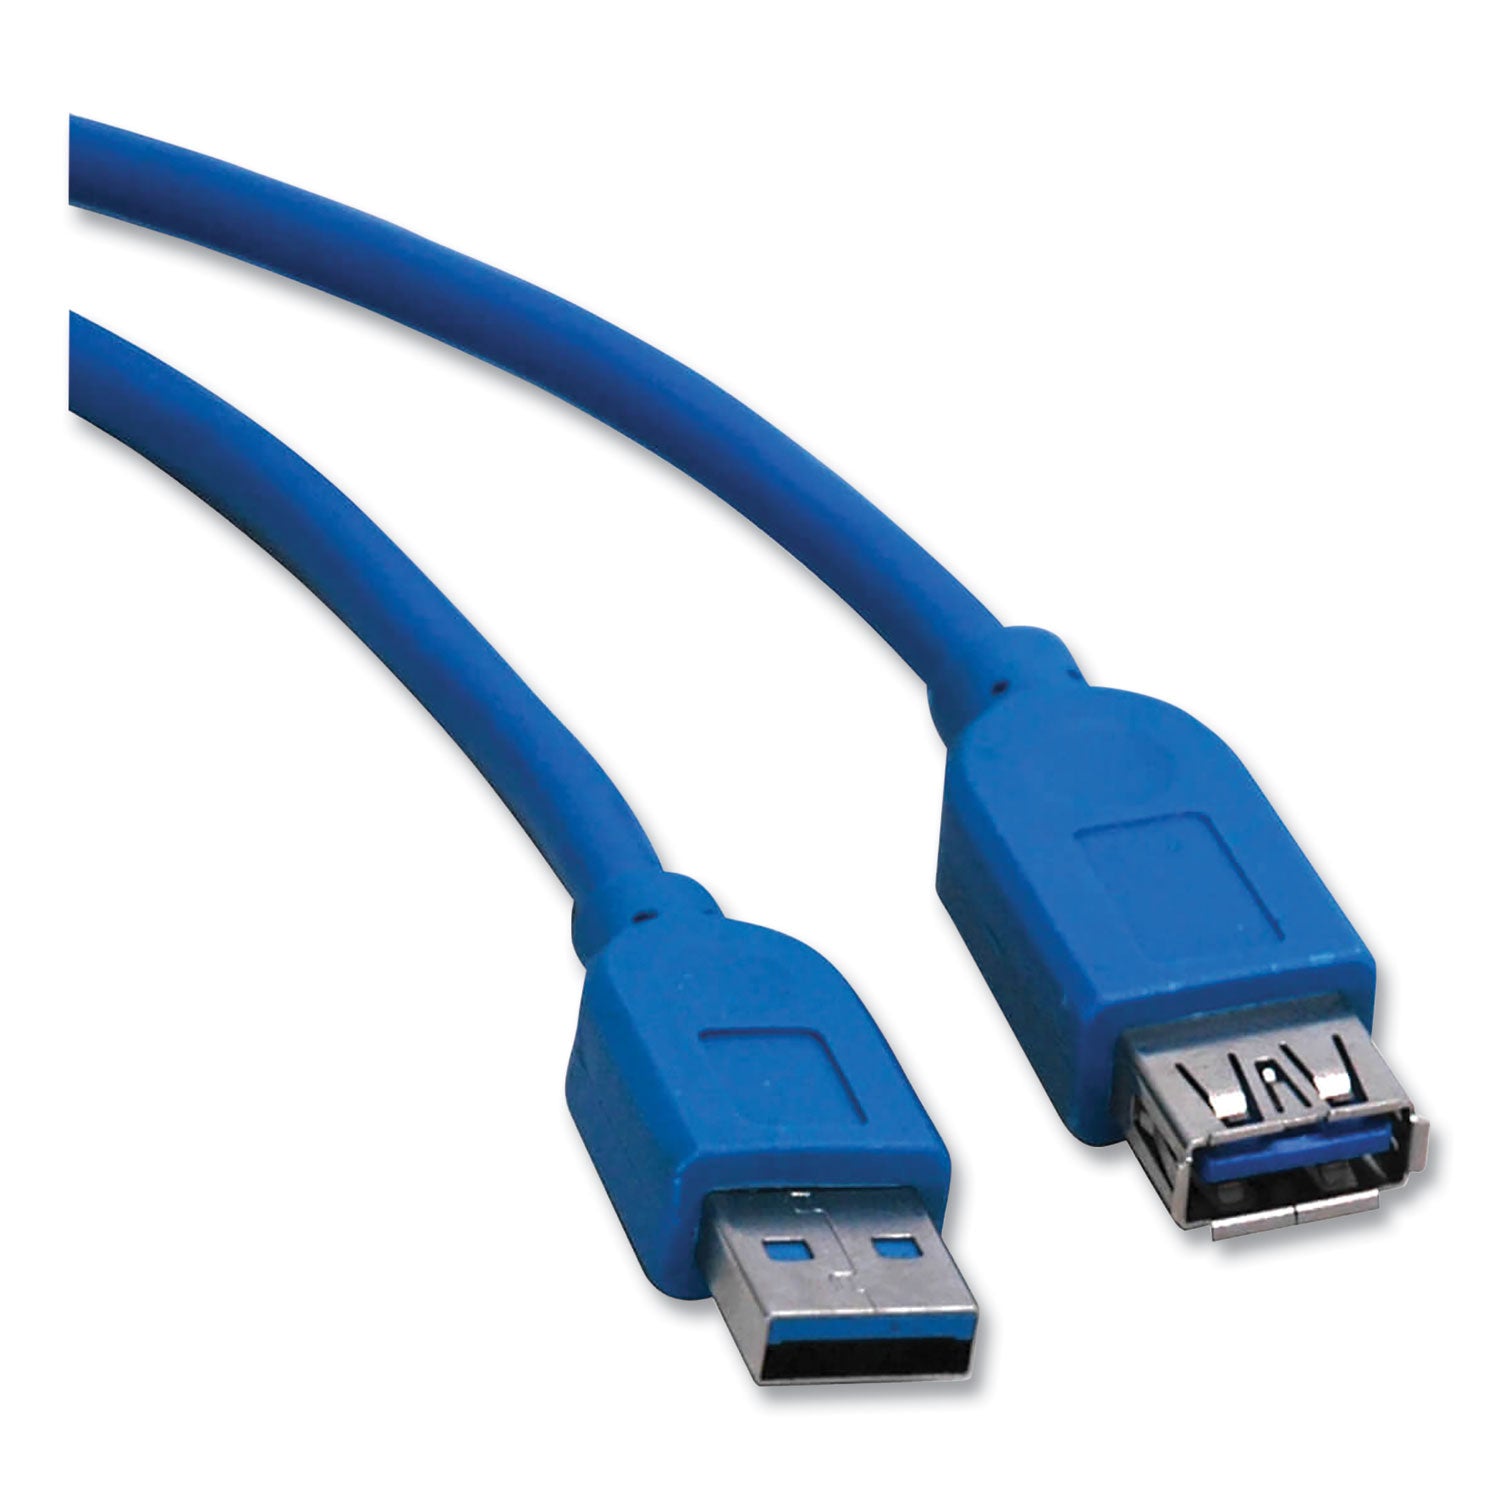 USB 3.0 SuperSpeed Extension Cable, 10 ft, Blue - 